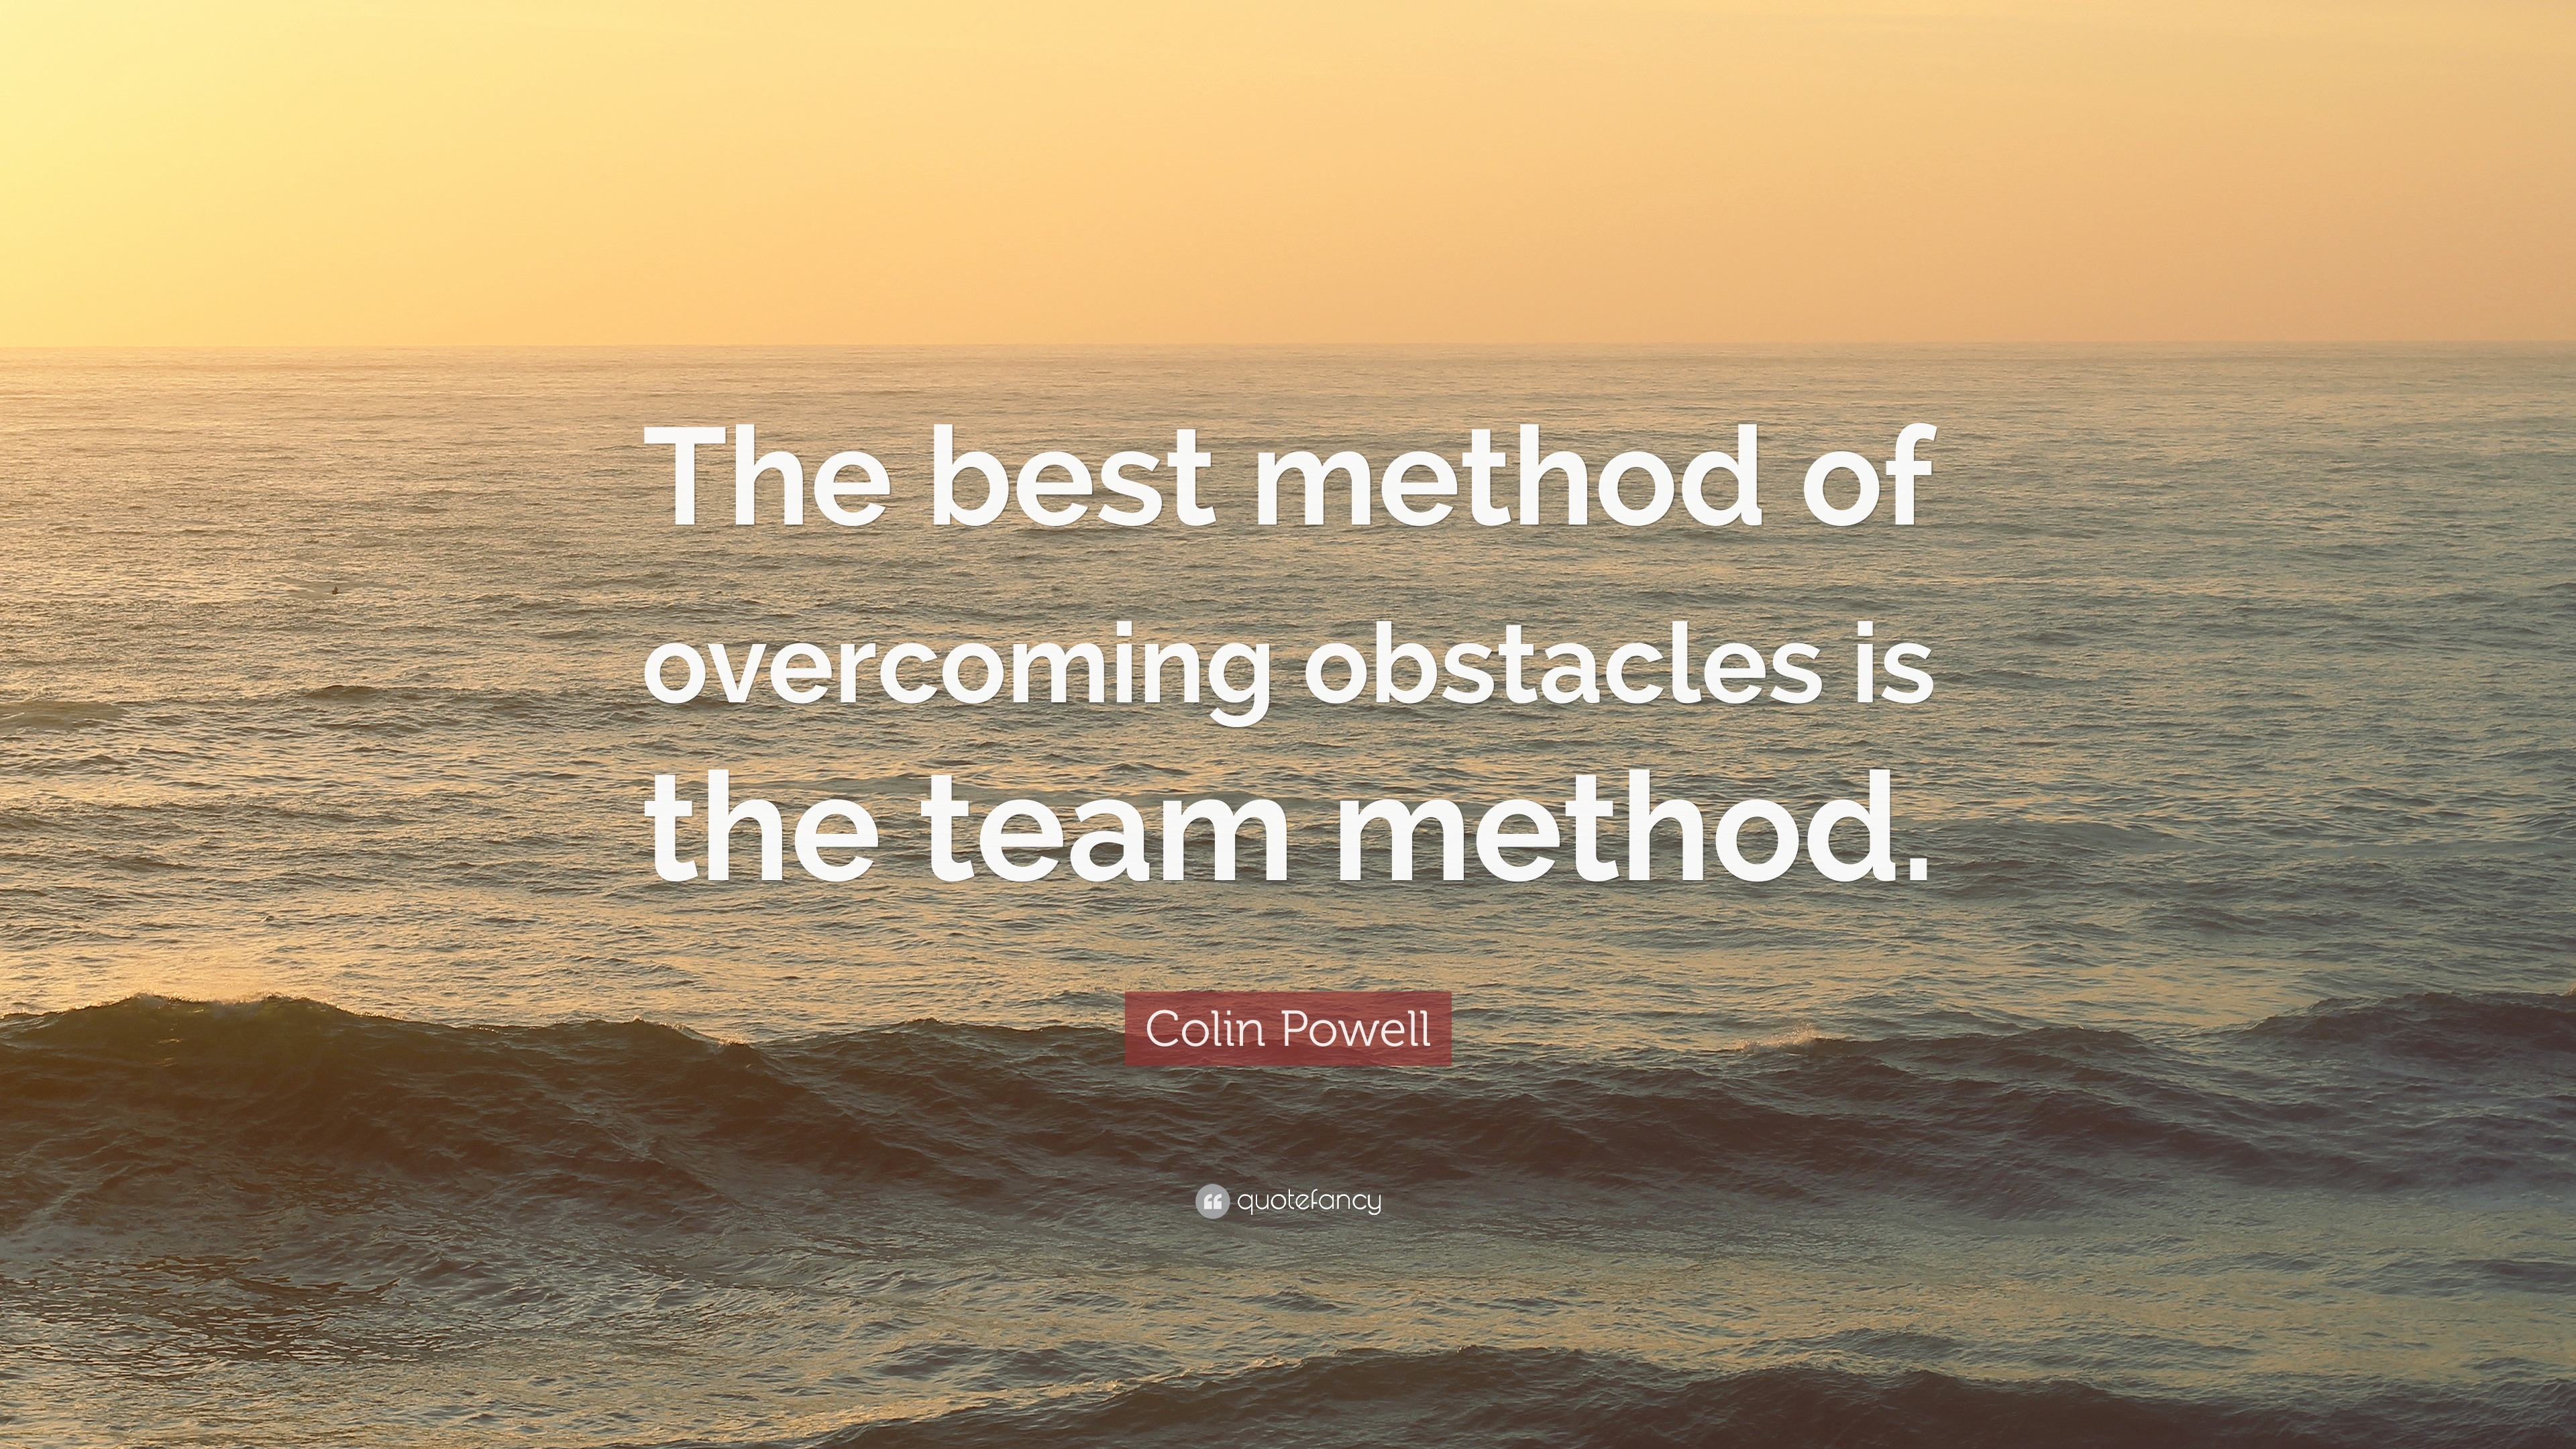 Colin Powell Quote: “The best method of overcoming obstacles is the